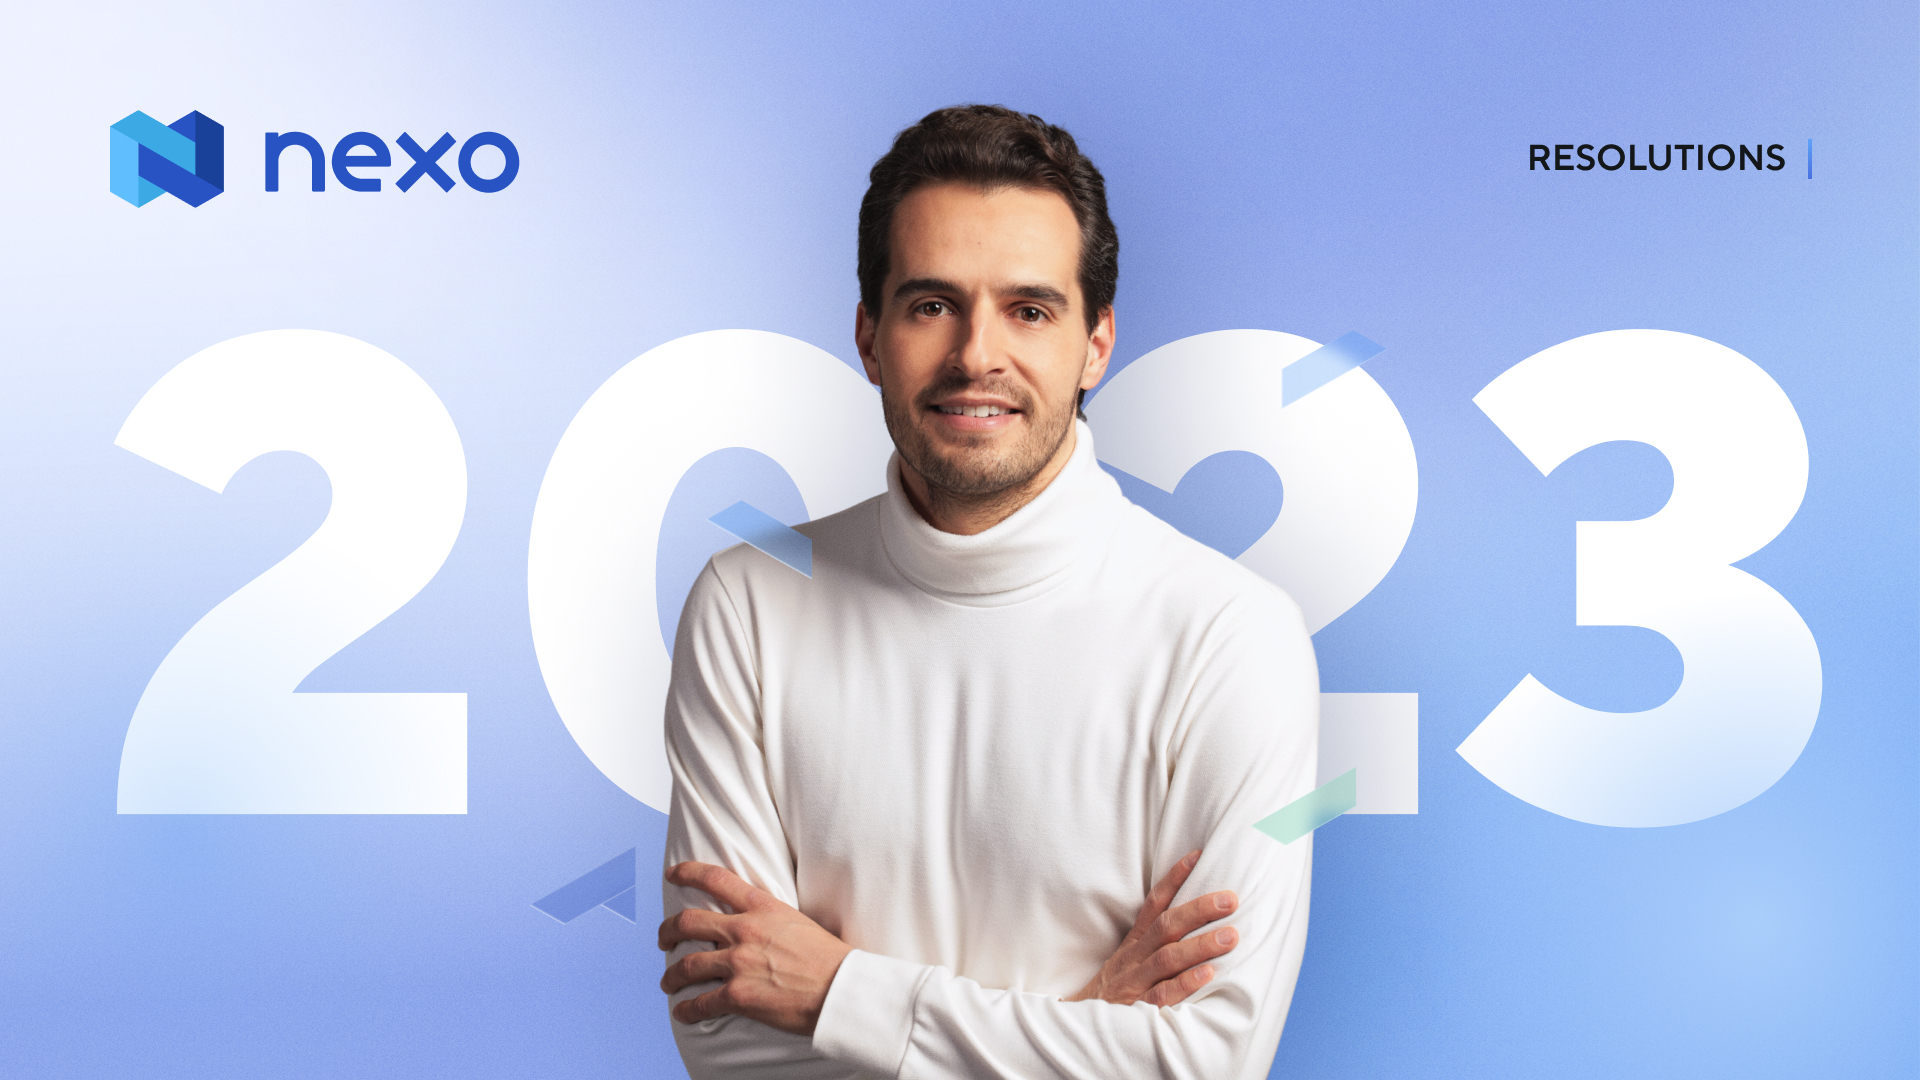 2023 Resolutions from Nexo’s Co-founder